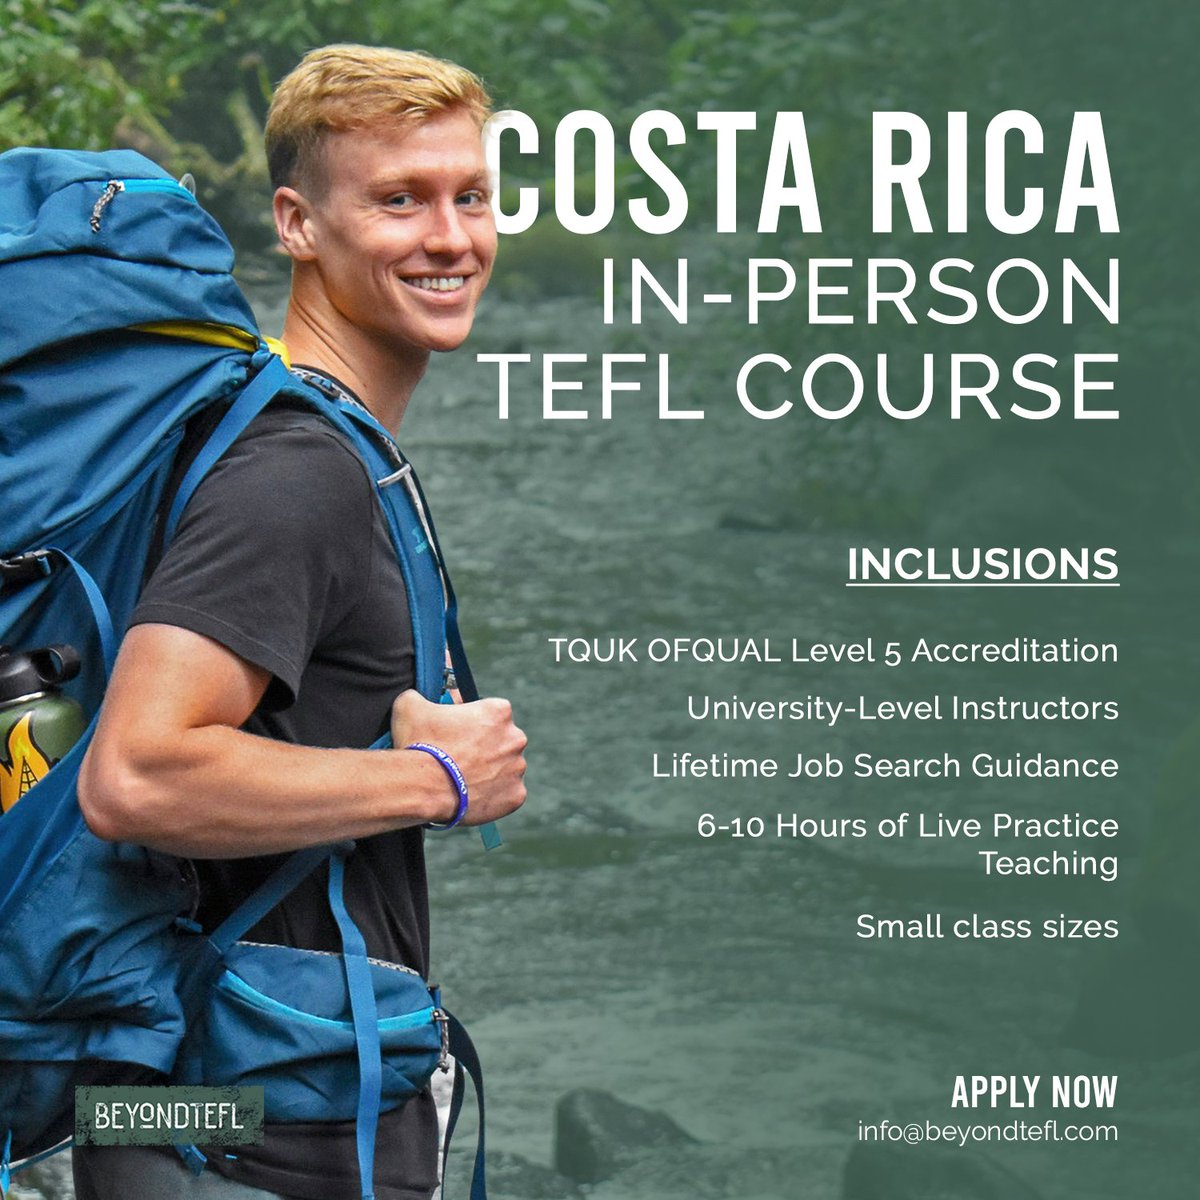 Earn an internationally recognized and accredited 4-Week #TEFLCertification in #CostaRica at a renowned #TEFLtraining center in the historic city of #Heredia, just outside of the capital of #SanJose. #BeyondfTEFL #TEFLCertification #CostaRicaTEFL